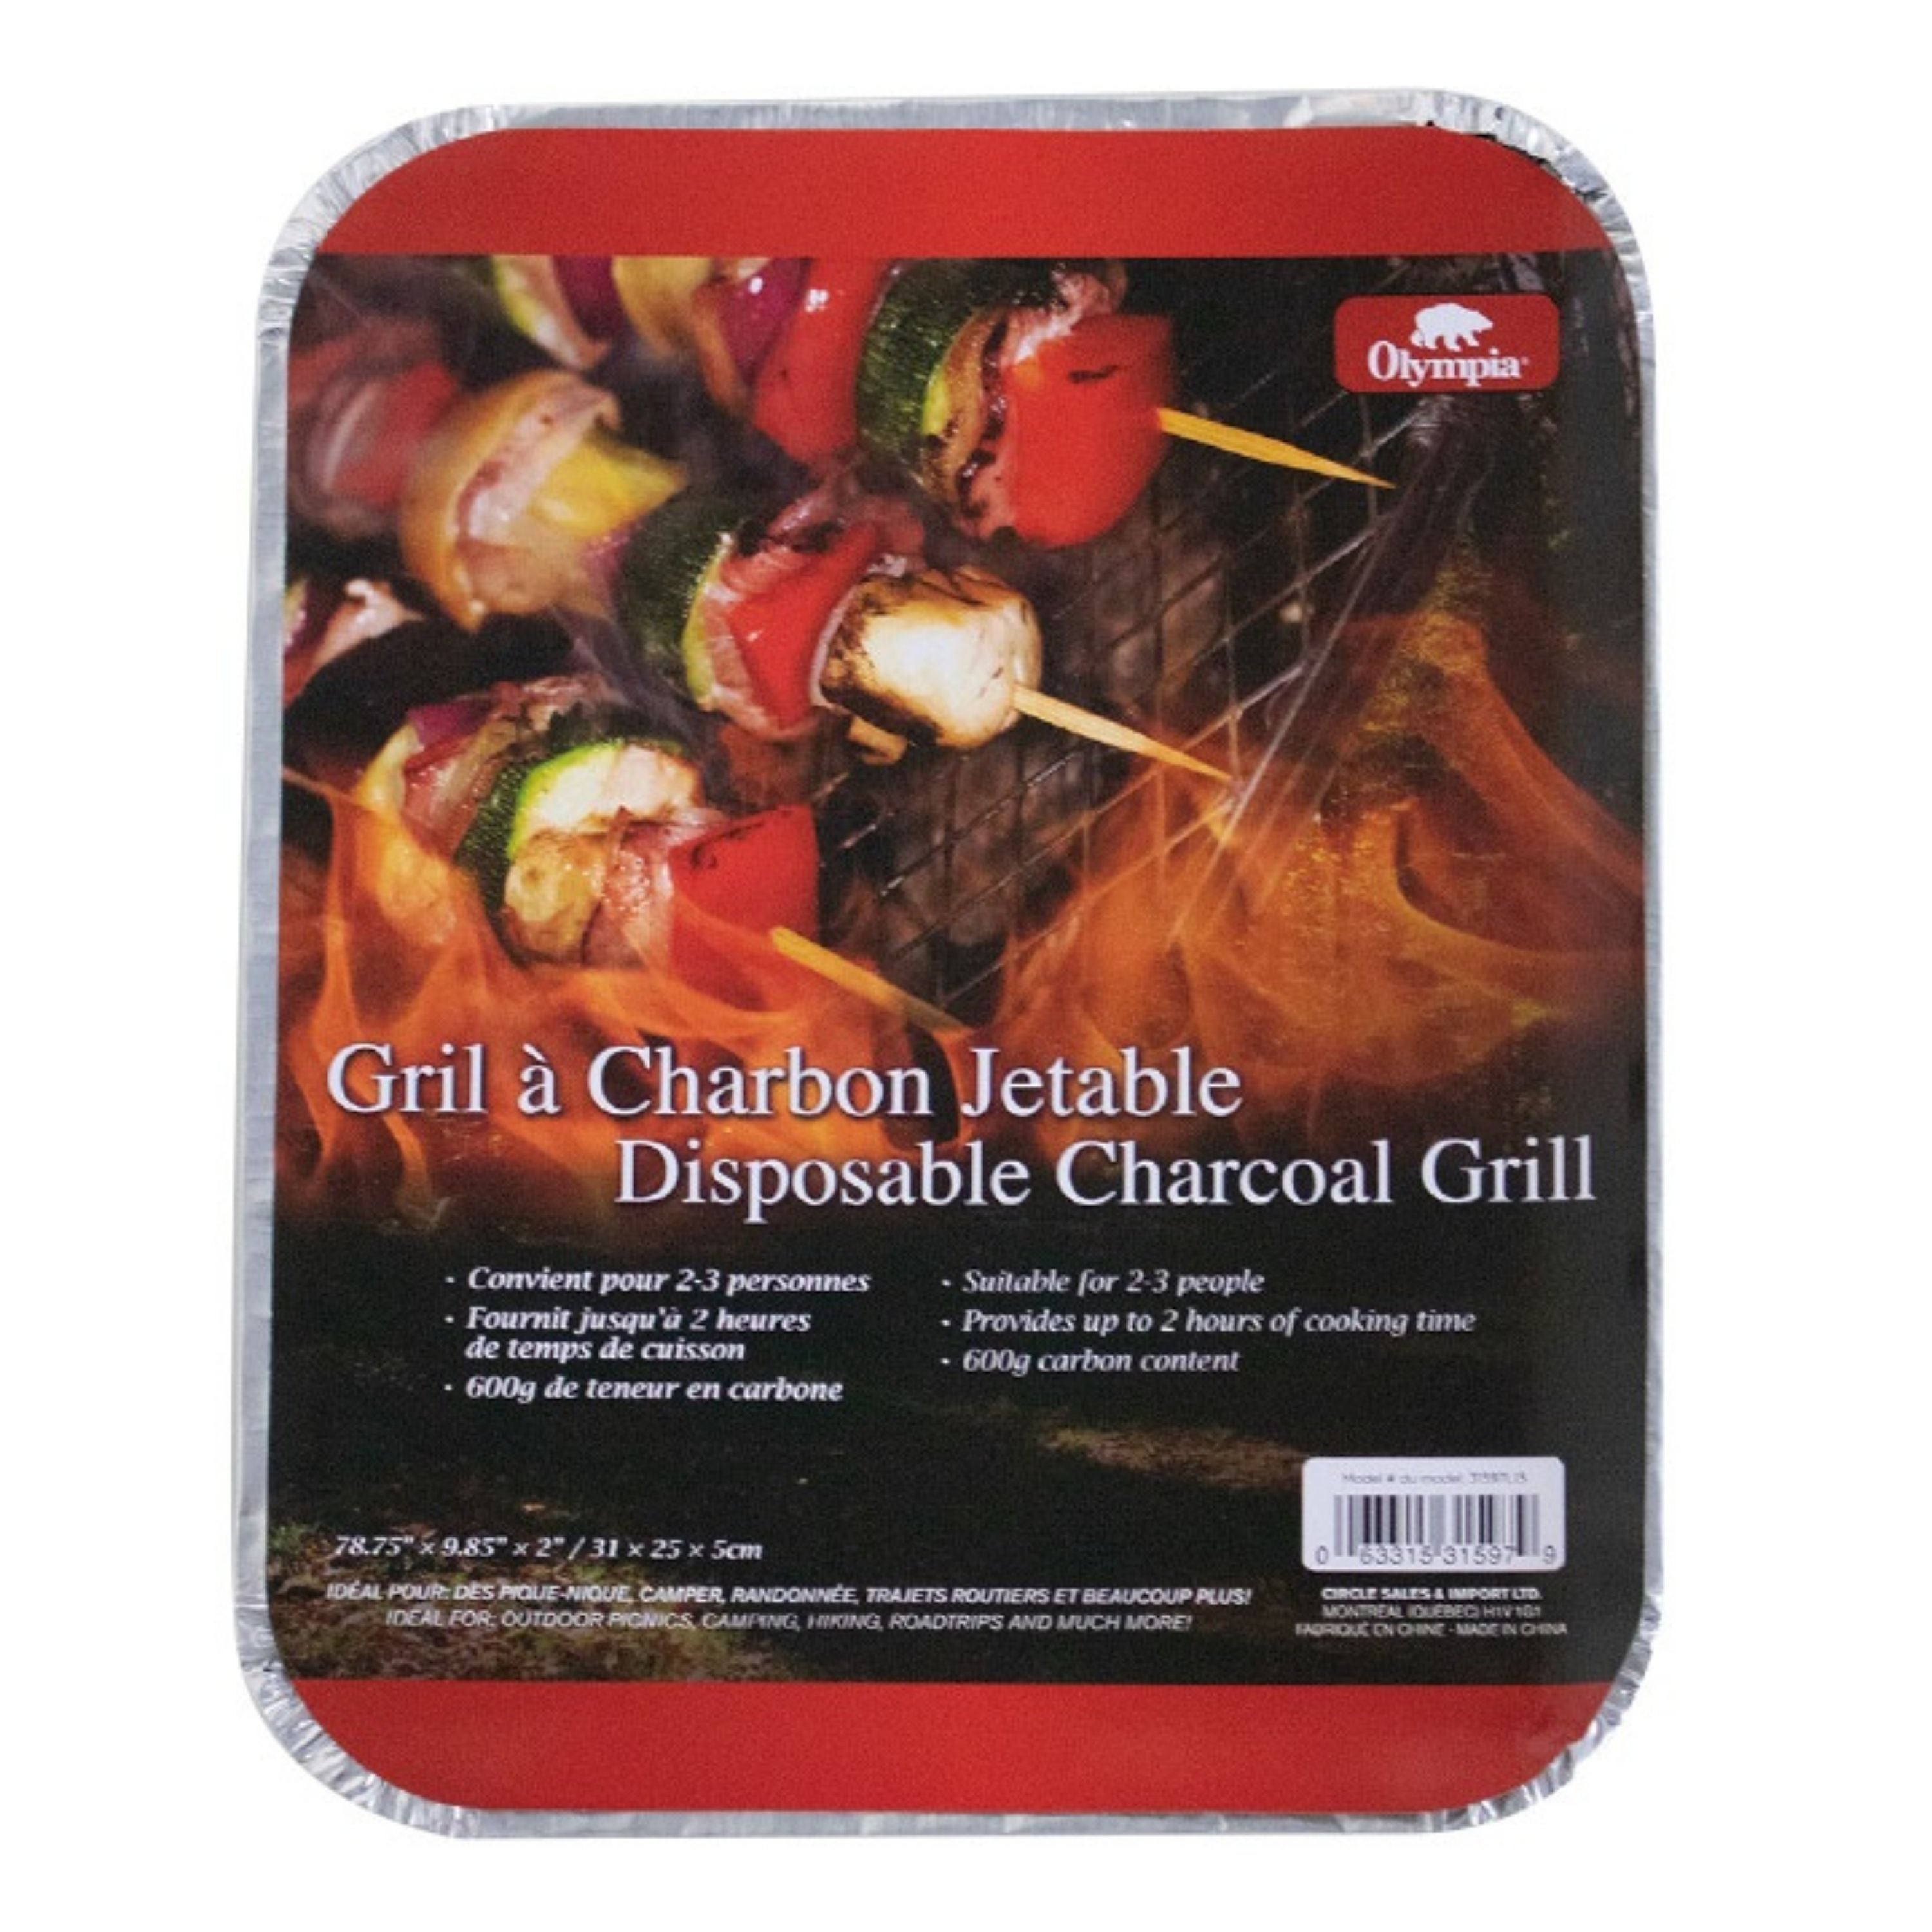 Disposable charcoal grill